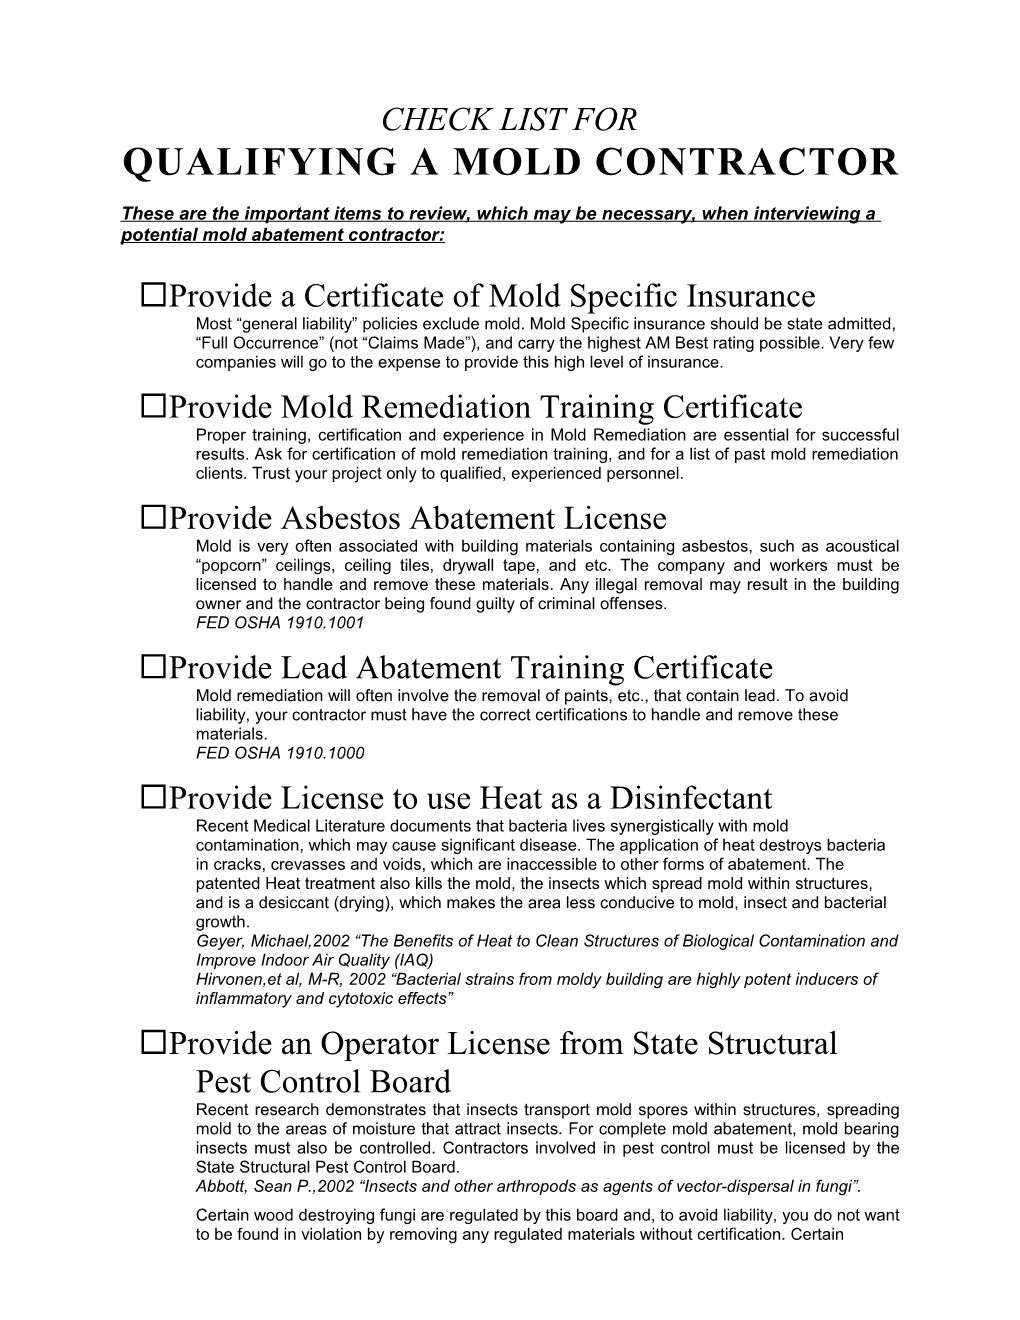 Customer Check List for Mold Contractor